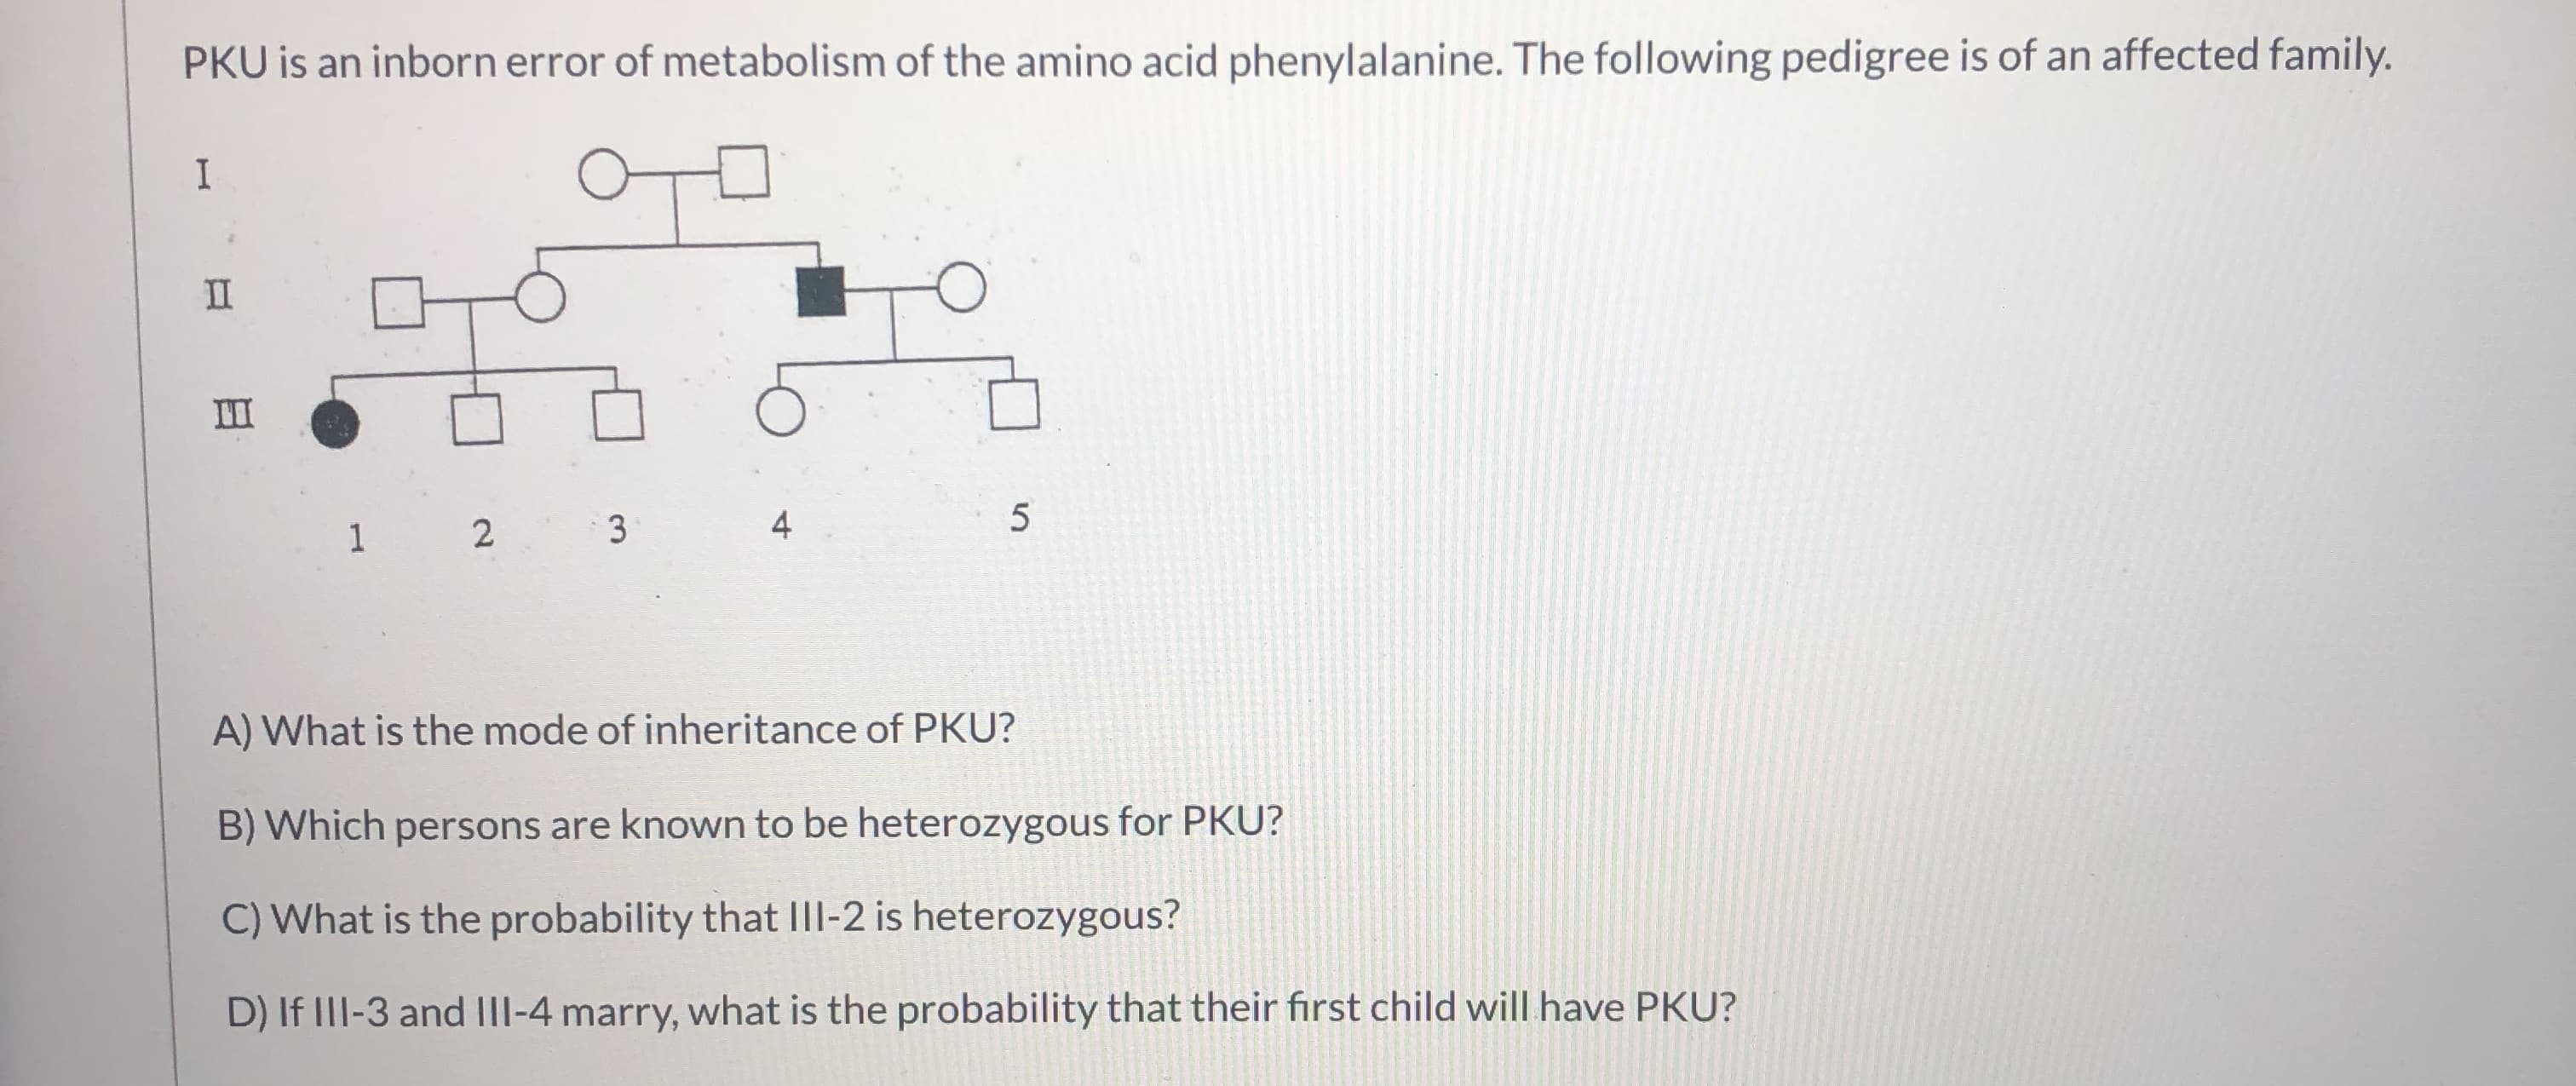 PKU is an inborn error of metabolism of the amino acid phenylalanine. The following pedigree is of an affected family.
I
II
II
4
1 2
A) What is the mode of inheritance of PKU?
B) Which persons are known to be heterozygous for PKU?
C) What is the probability that III-2 is heterozygous?
D) If III-3 and III-4 marry, what is the probability that their first child will have PKU?
3.
